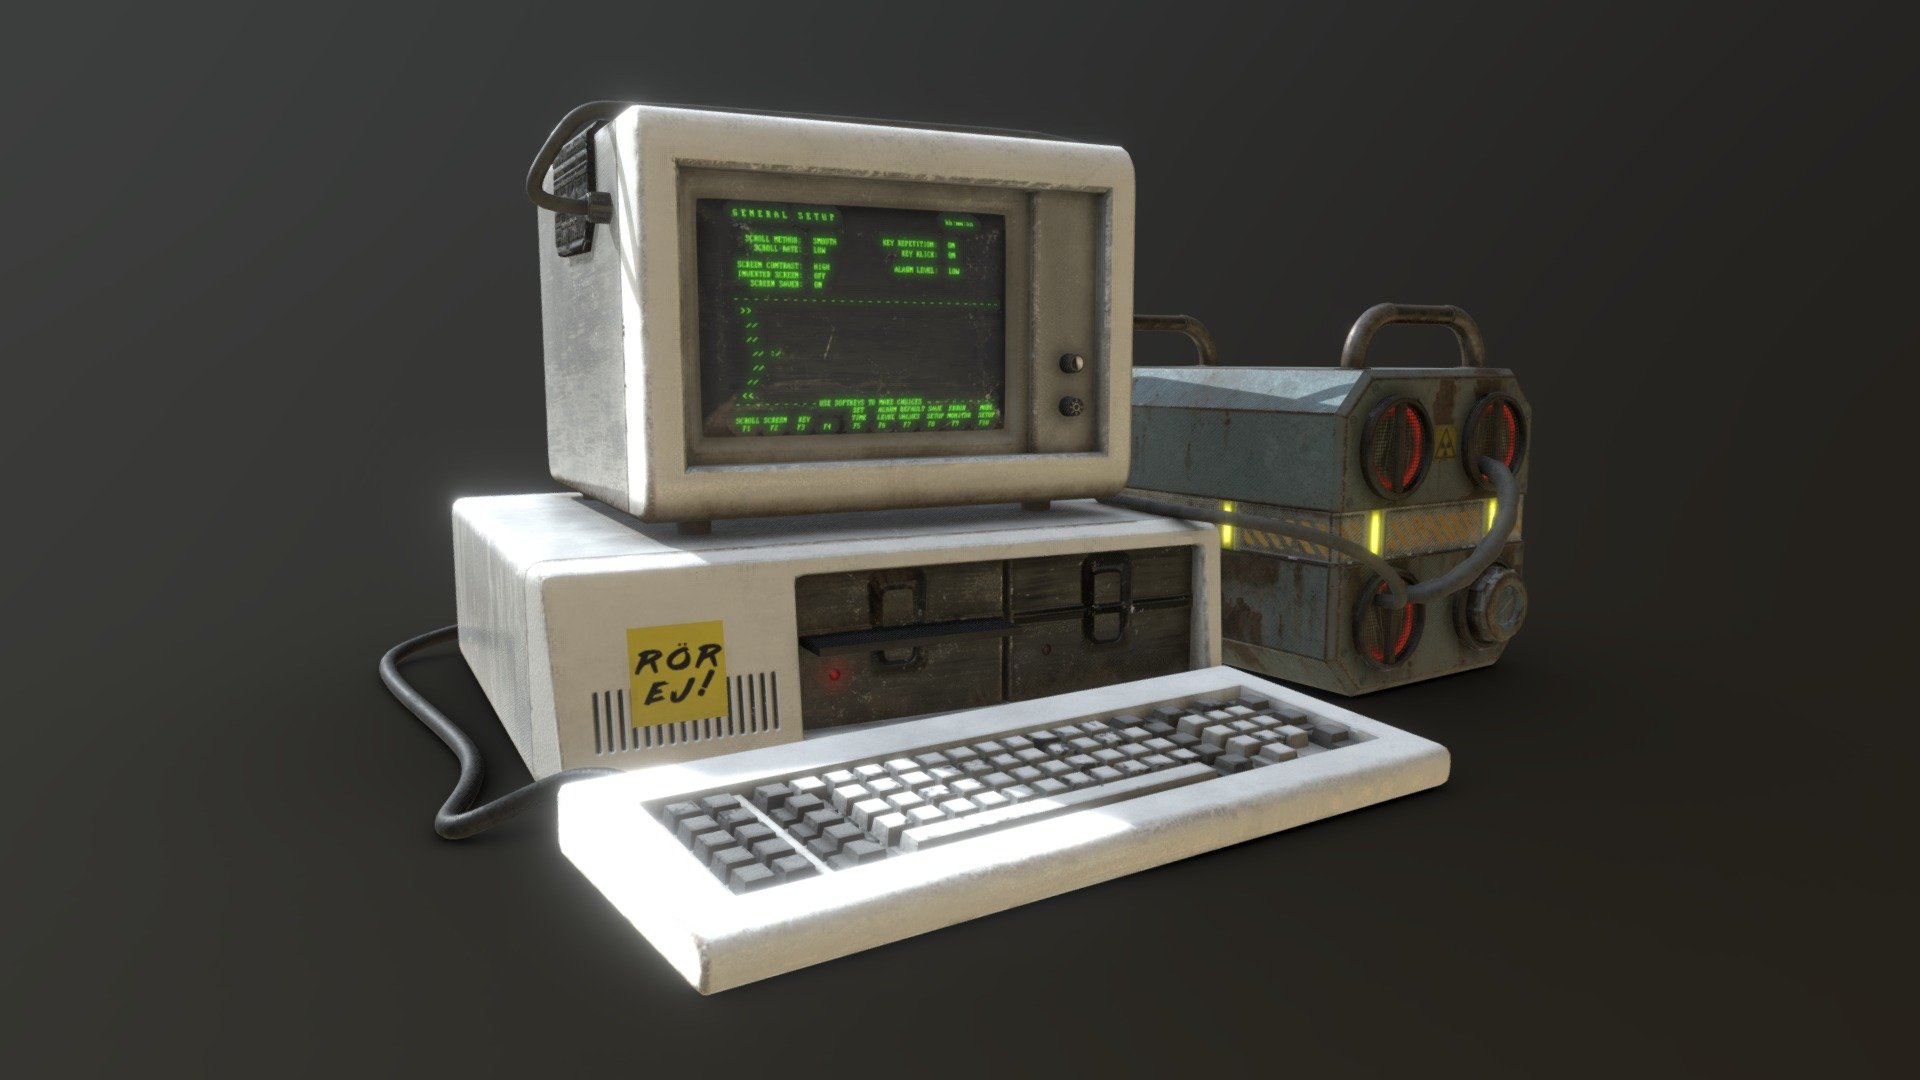 IBM 5150, but with the dystopian cyberpunk upgrade kit.

This model is a part of a small personal scene/enviroment, so optimization wasn't really a priority. That's also why the back side isn't modeled/detailed 3d model